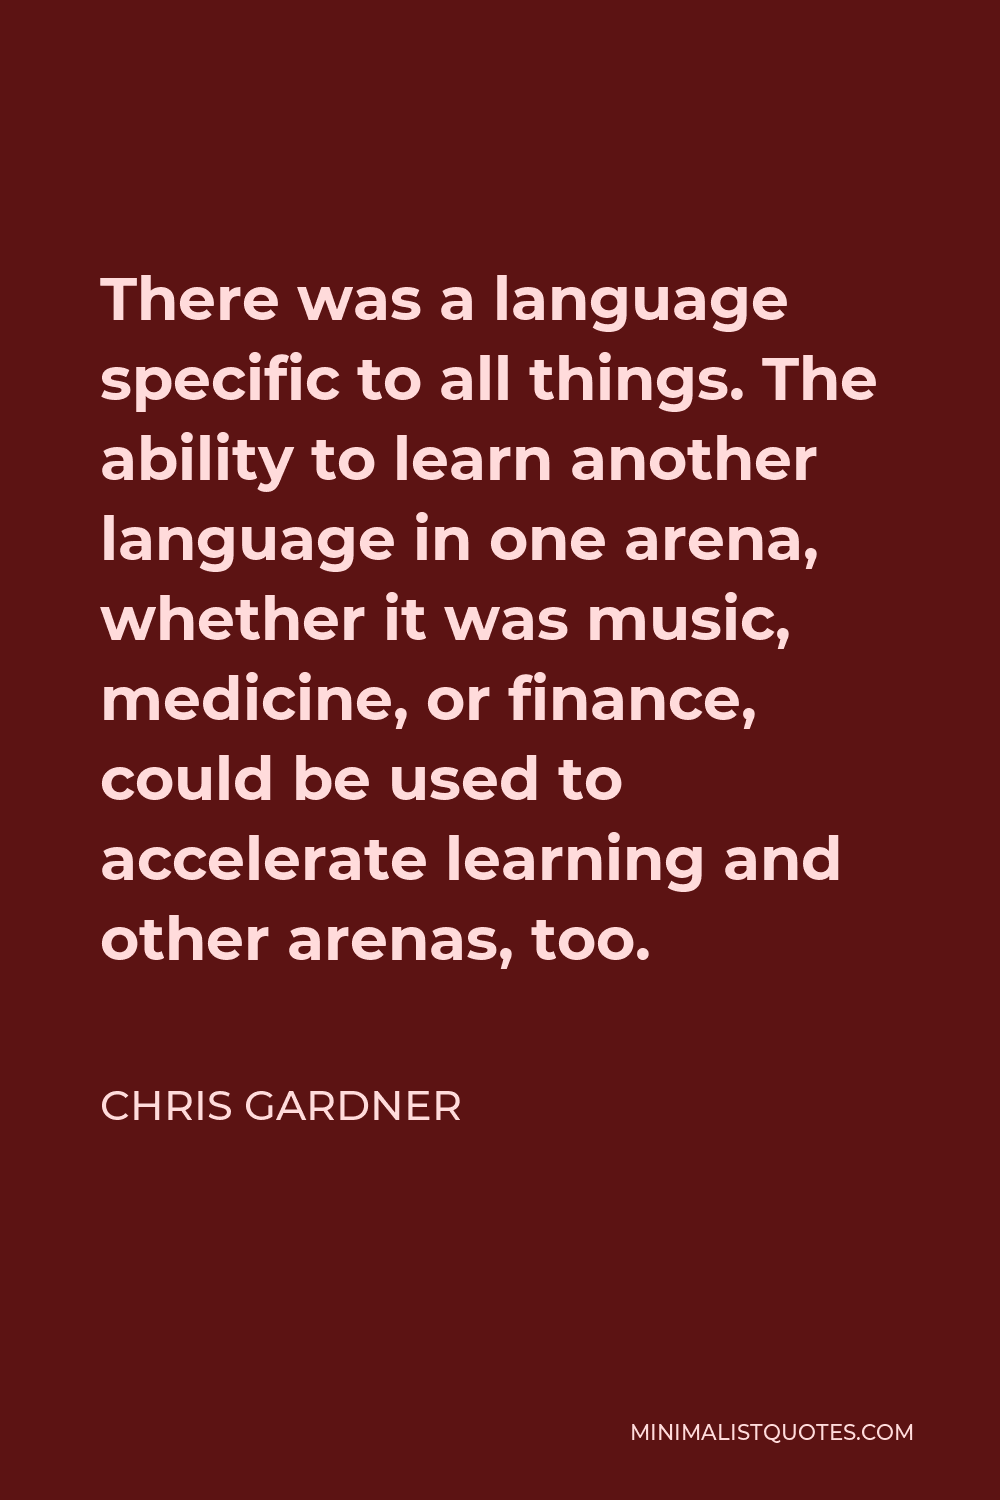 Chris Gardner Quote - There was a language specific to all things. The ability to learn another language in one arena, whether it was music, medicine, or finance, could be used to accelerate learning and other arenas, too.